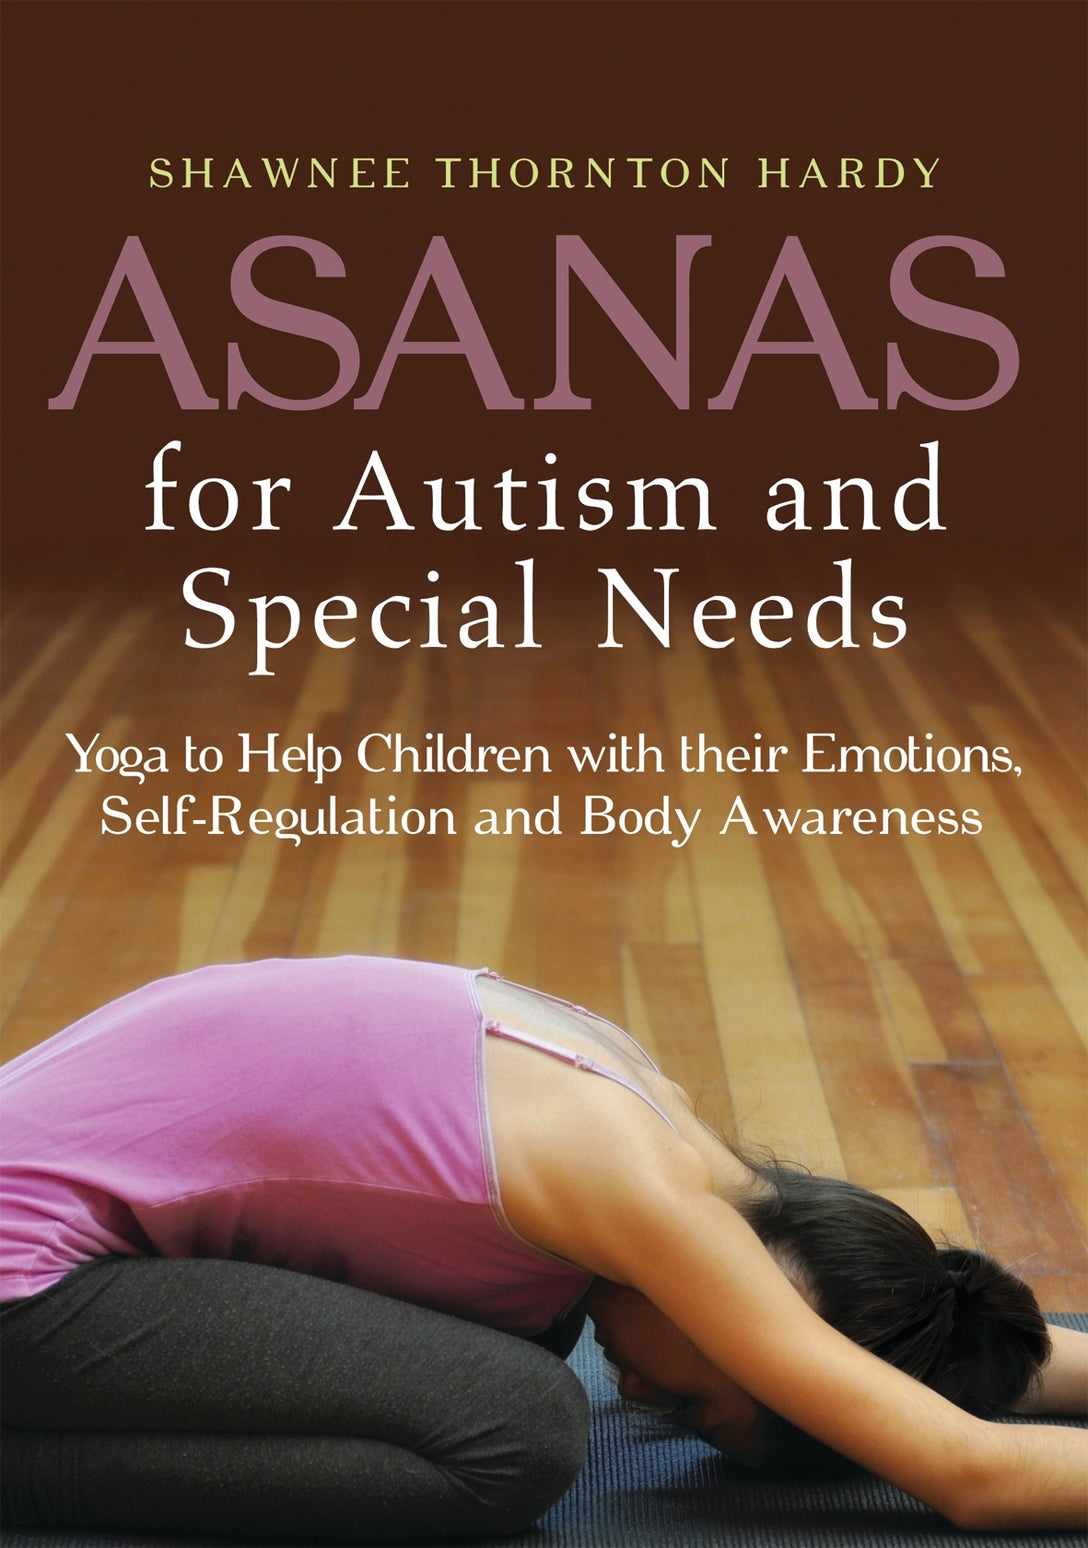 Asanas for Autism and Special Needs by Shawnee Thornton Thornton Hardy, Tim Hardy